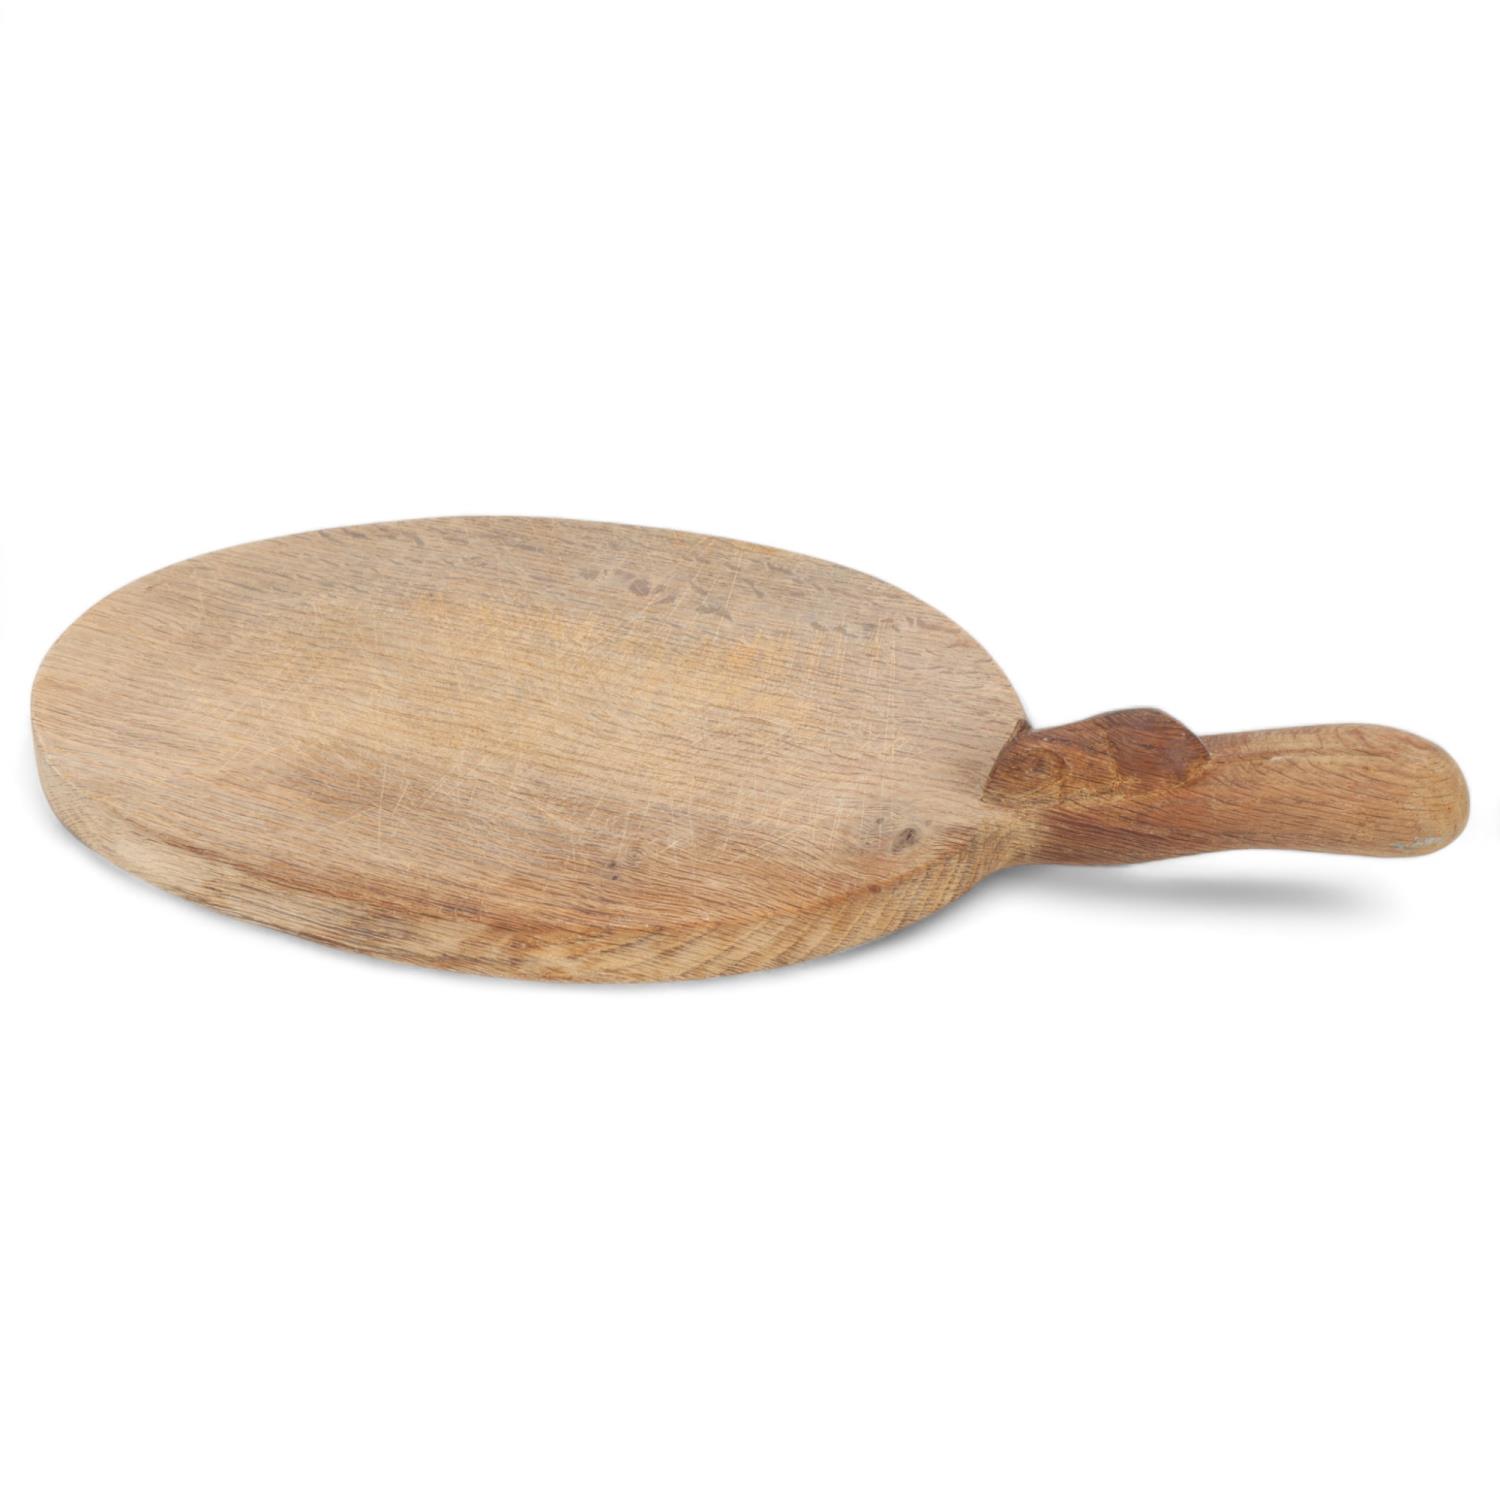 Robert Mouseman Thompson, oak breadboard, probably circa 1960s, with mouse carved handle, length